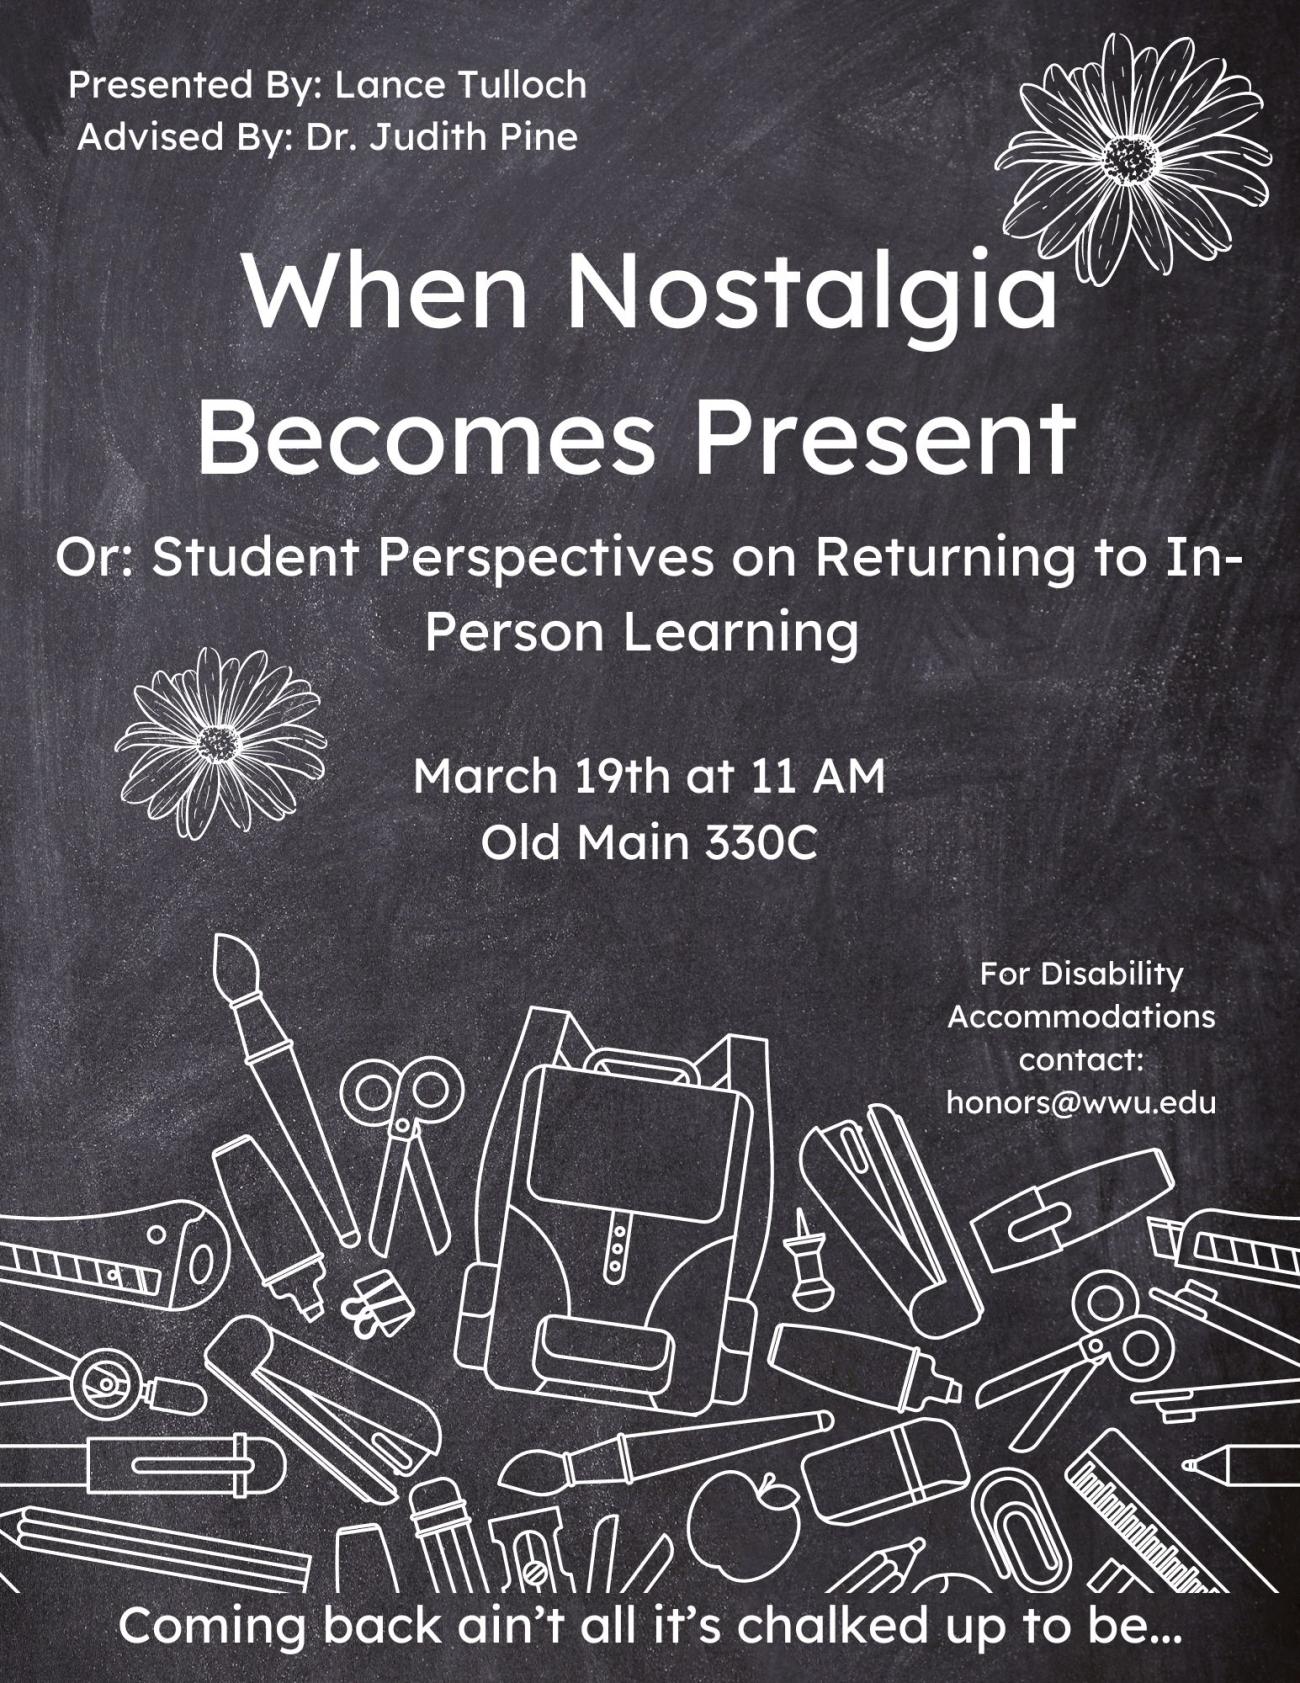 In white letters the poster reads, “Presented by Lance Tulloch, advised by Dr. Judith Pine. When Nostalgia Becomes Present; Or: Student Perspectives on Returning to In-Person Learning.” The time and location are labeled: “March 19th at 11 AM, Old Main 330C.” There is a section near the bottom of the page which reads: “For Disability Accommodations contact: honors@wwu.edu.” A Banner at the bottom of the poster reads: “Coming back ain’t all it’s chalked up to be...”